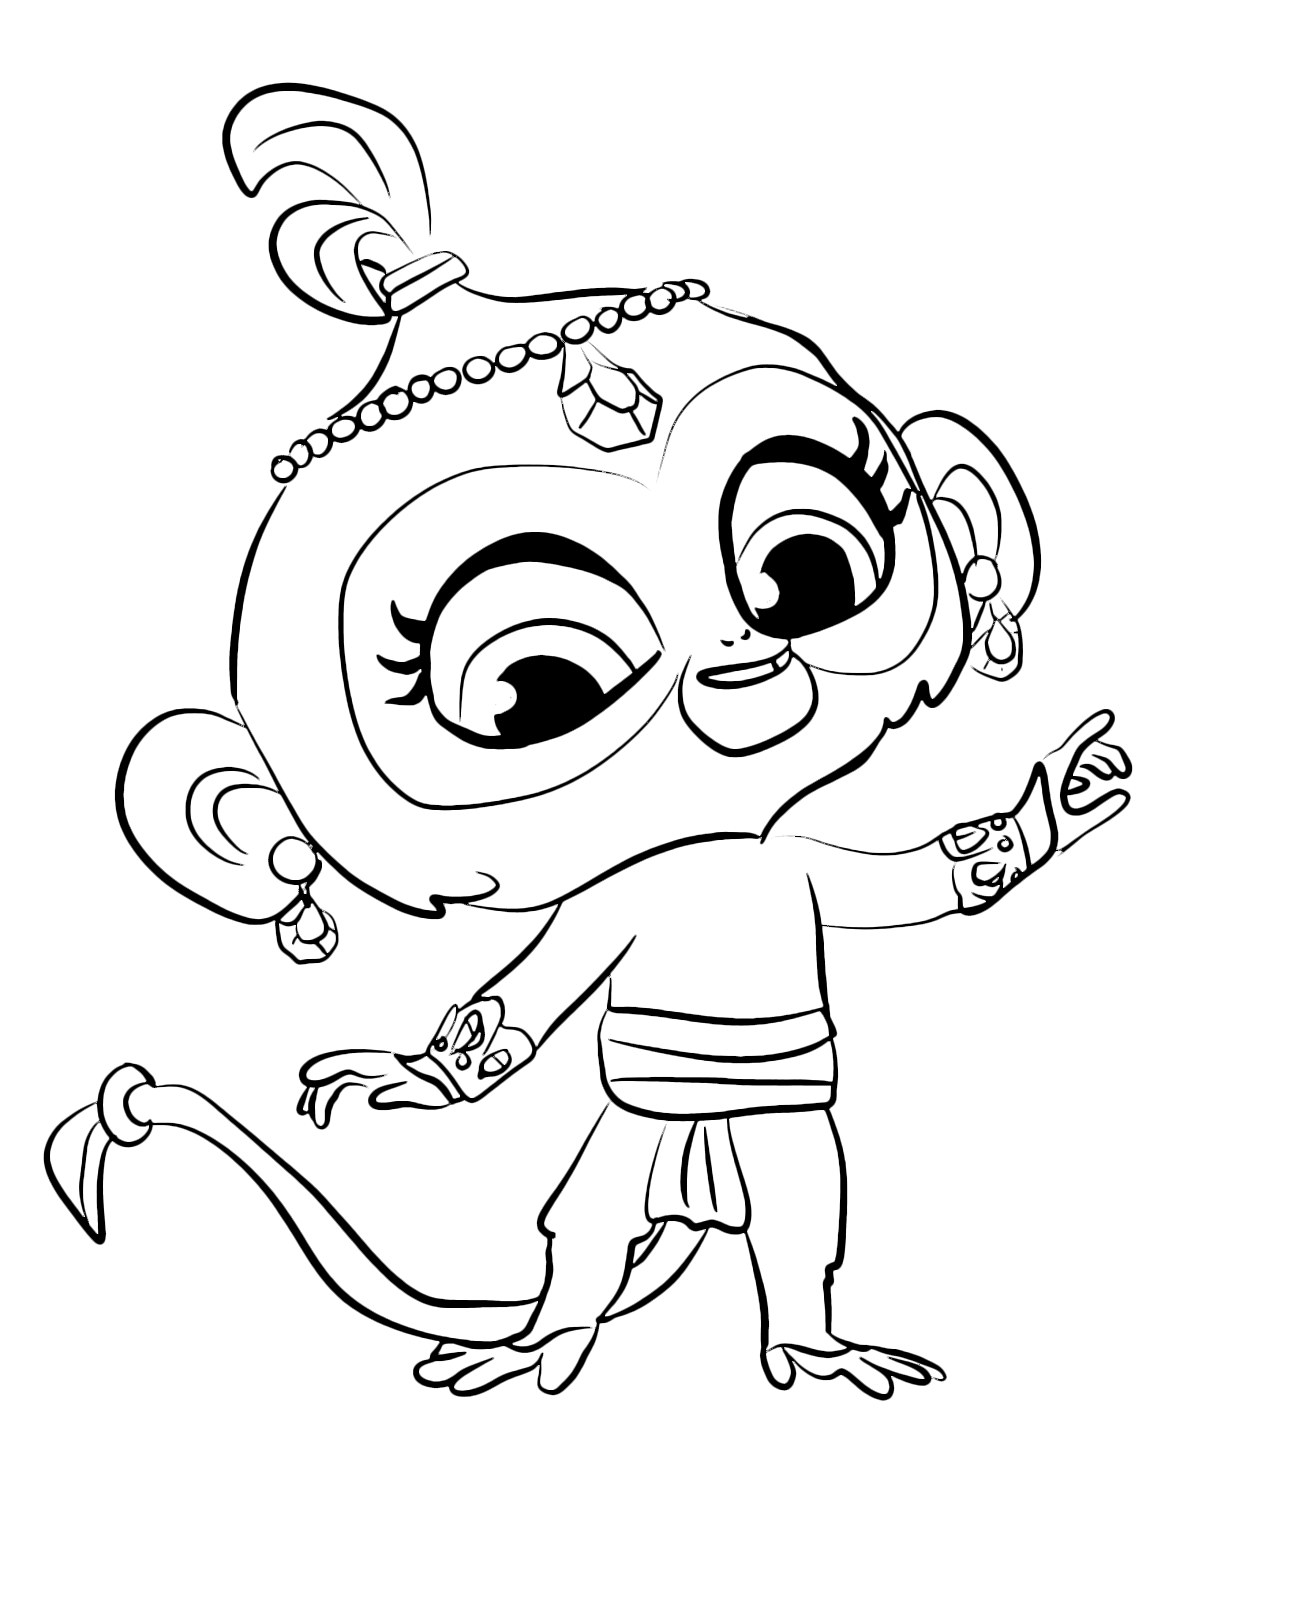 Shimmer and Shine - Tala the little monkey with open arms